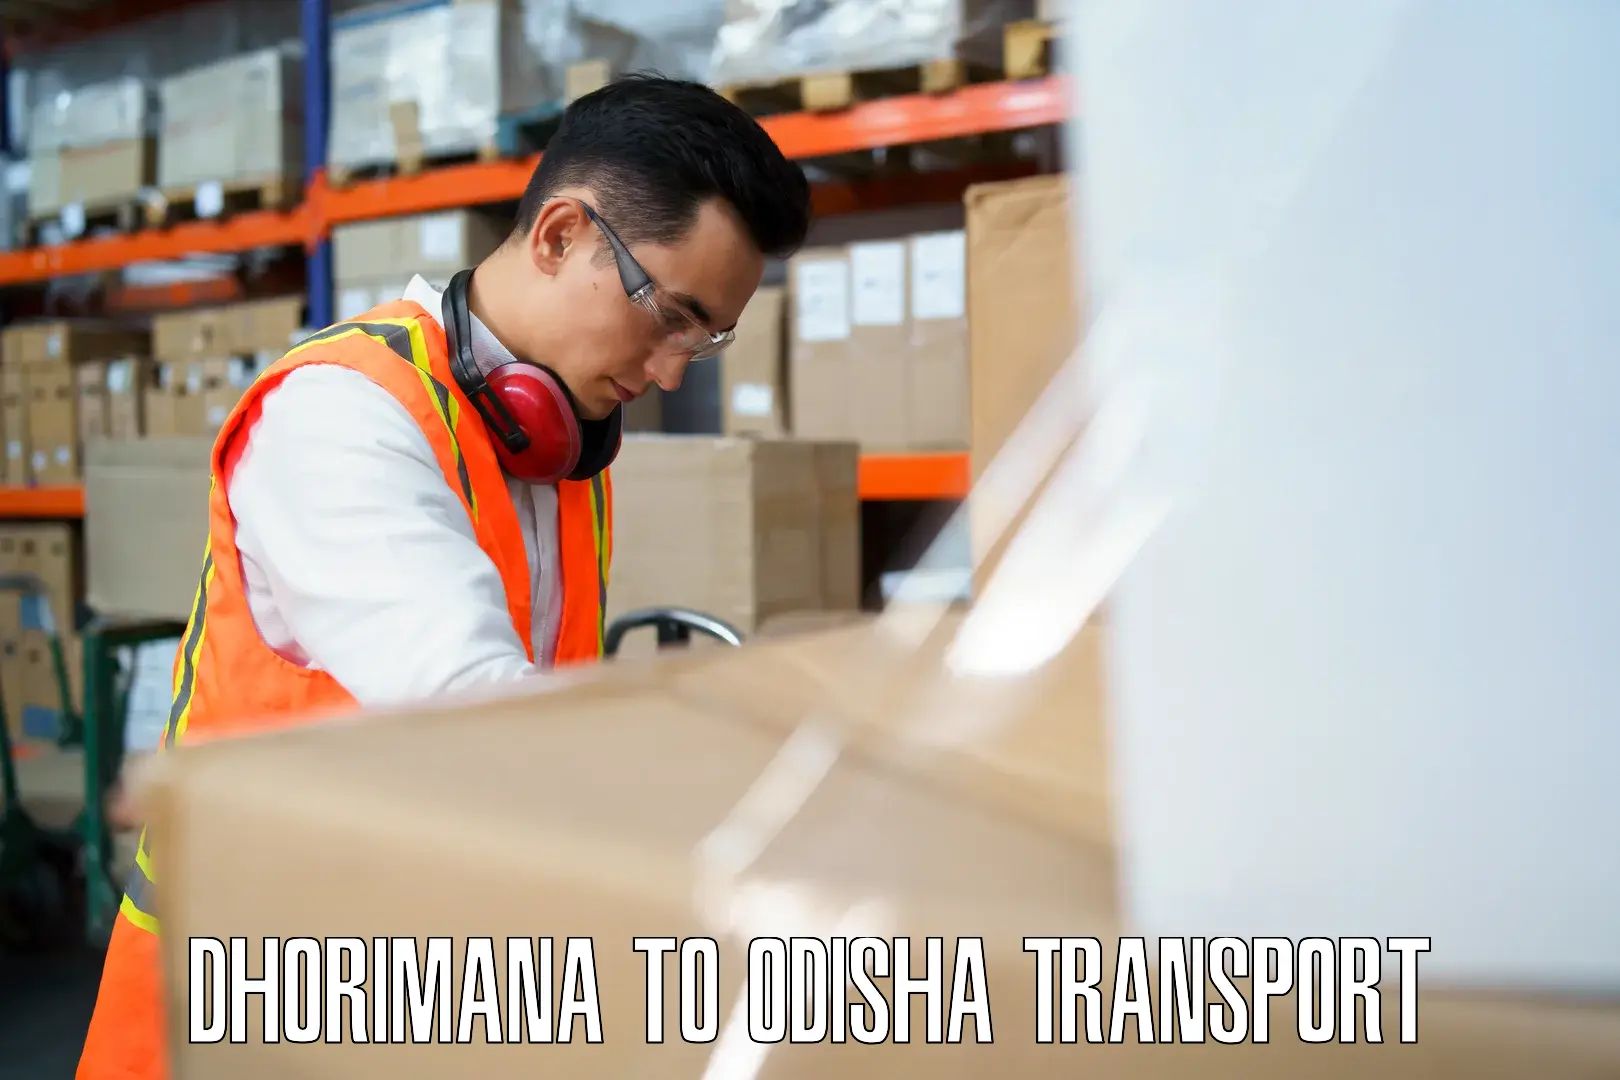 Logistics transportation services in Dhorimana to Asika